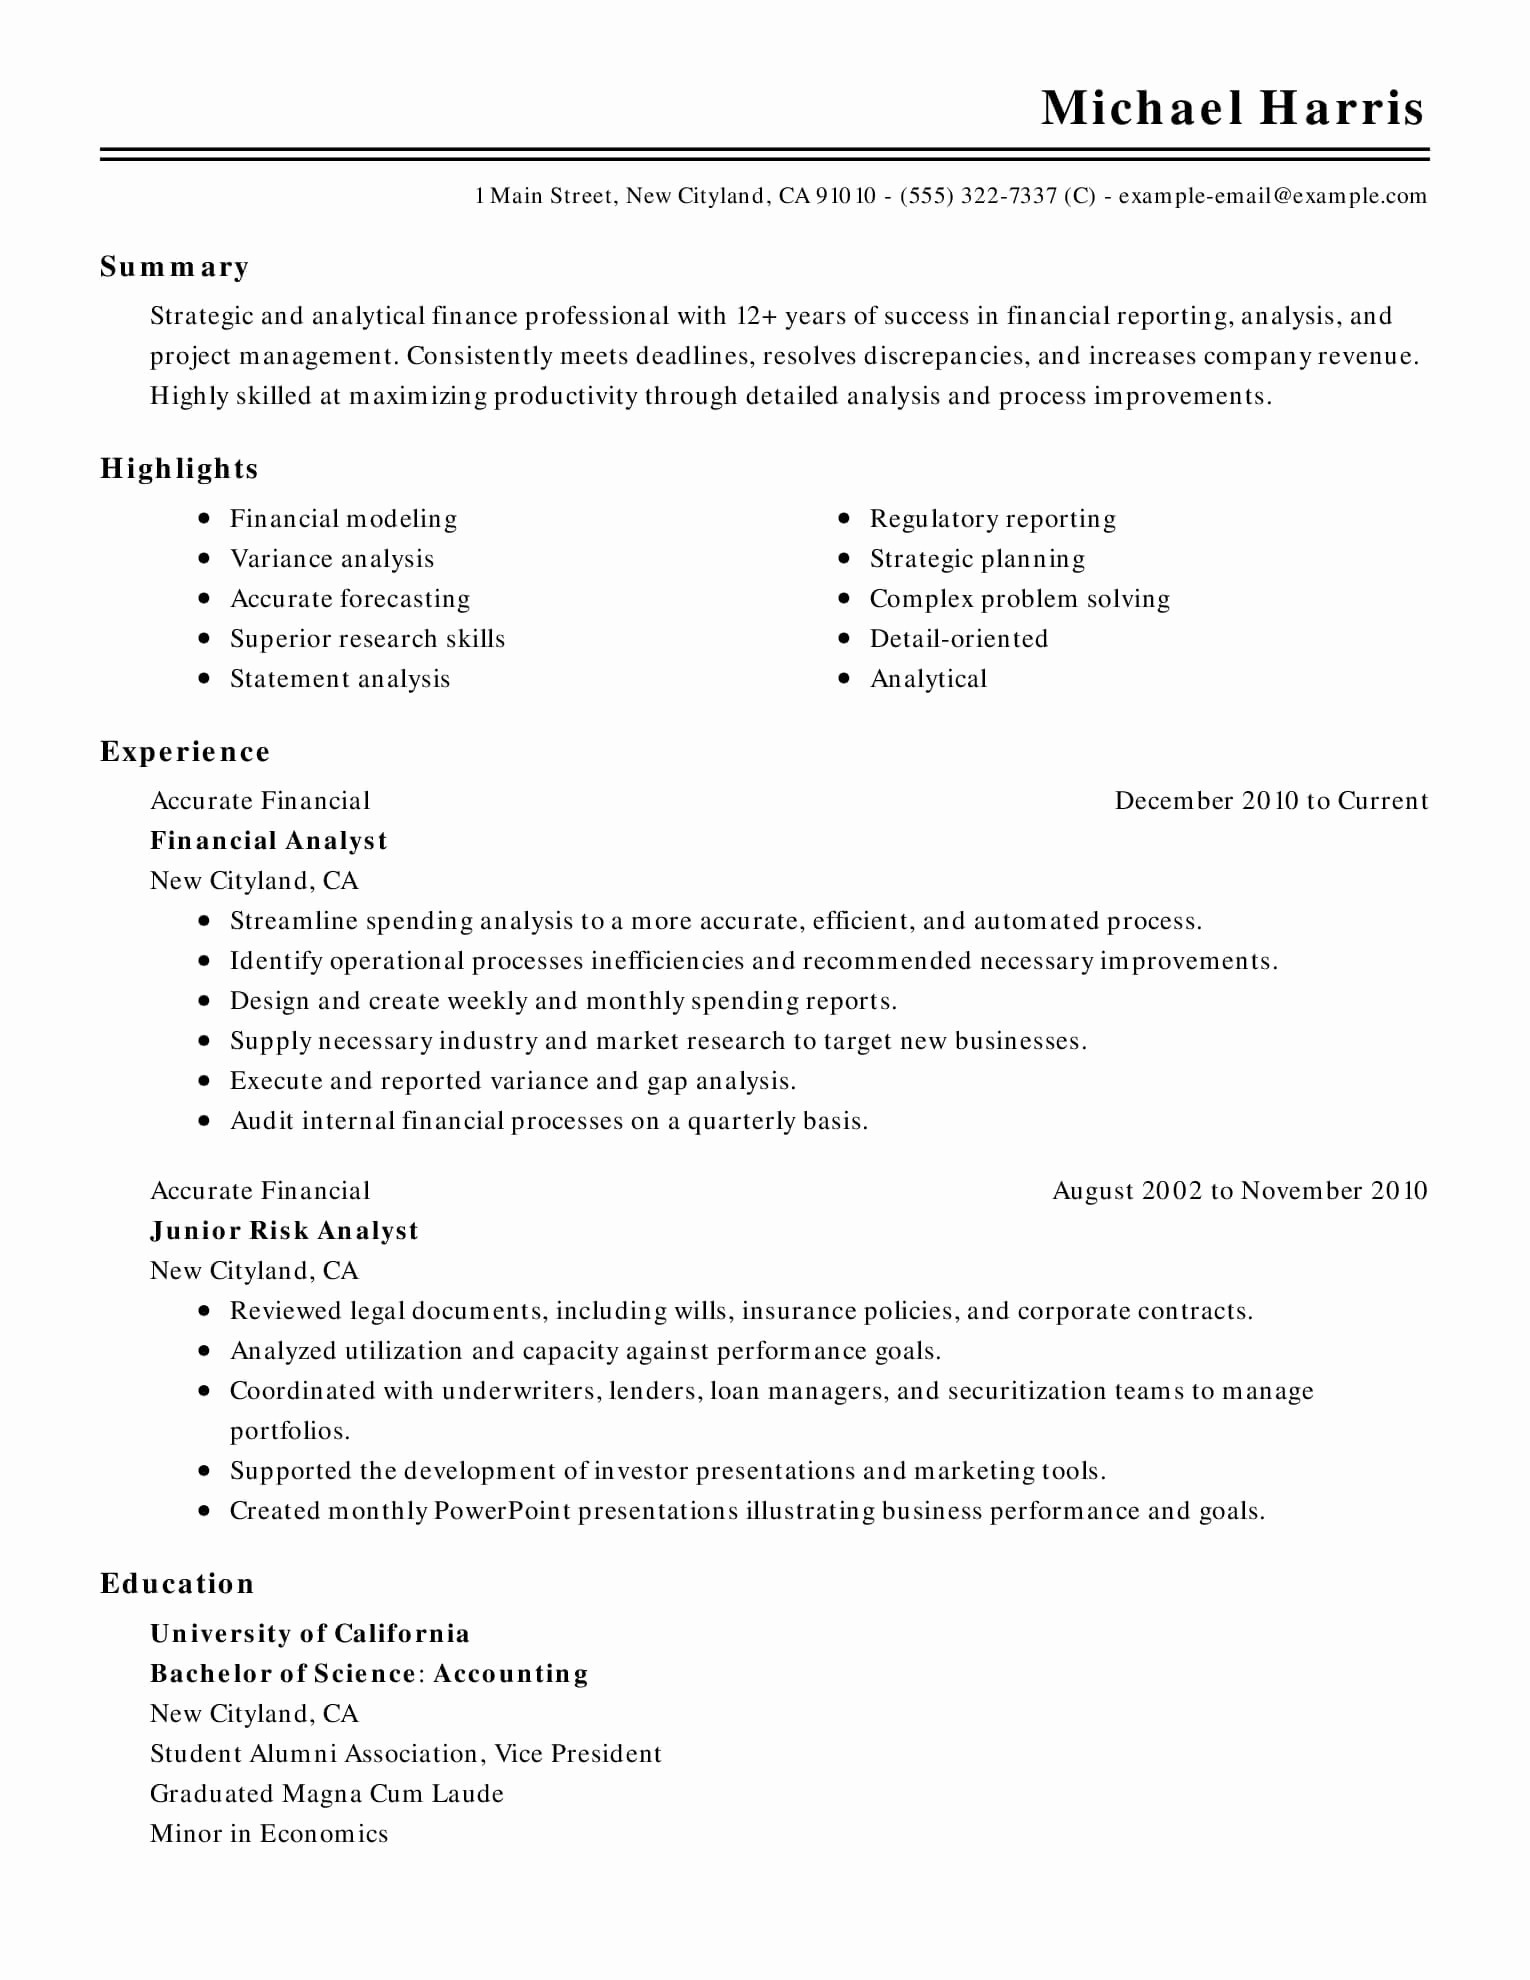 Resume Templates On Microsoft Word New 15 Of the Best Resume Templates for Microsoft Word Fice